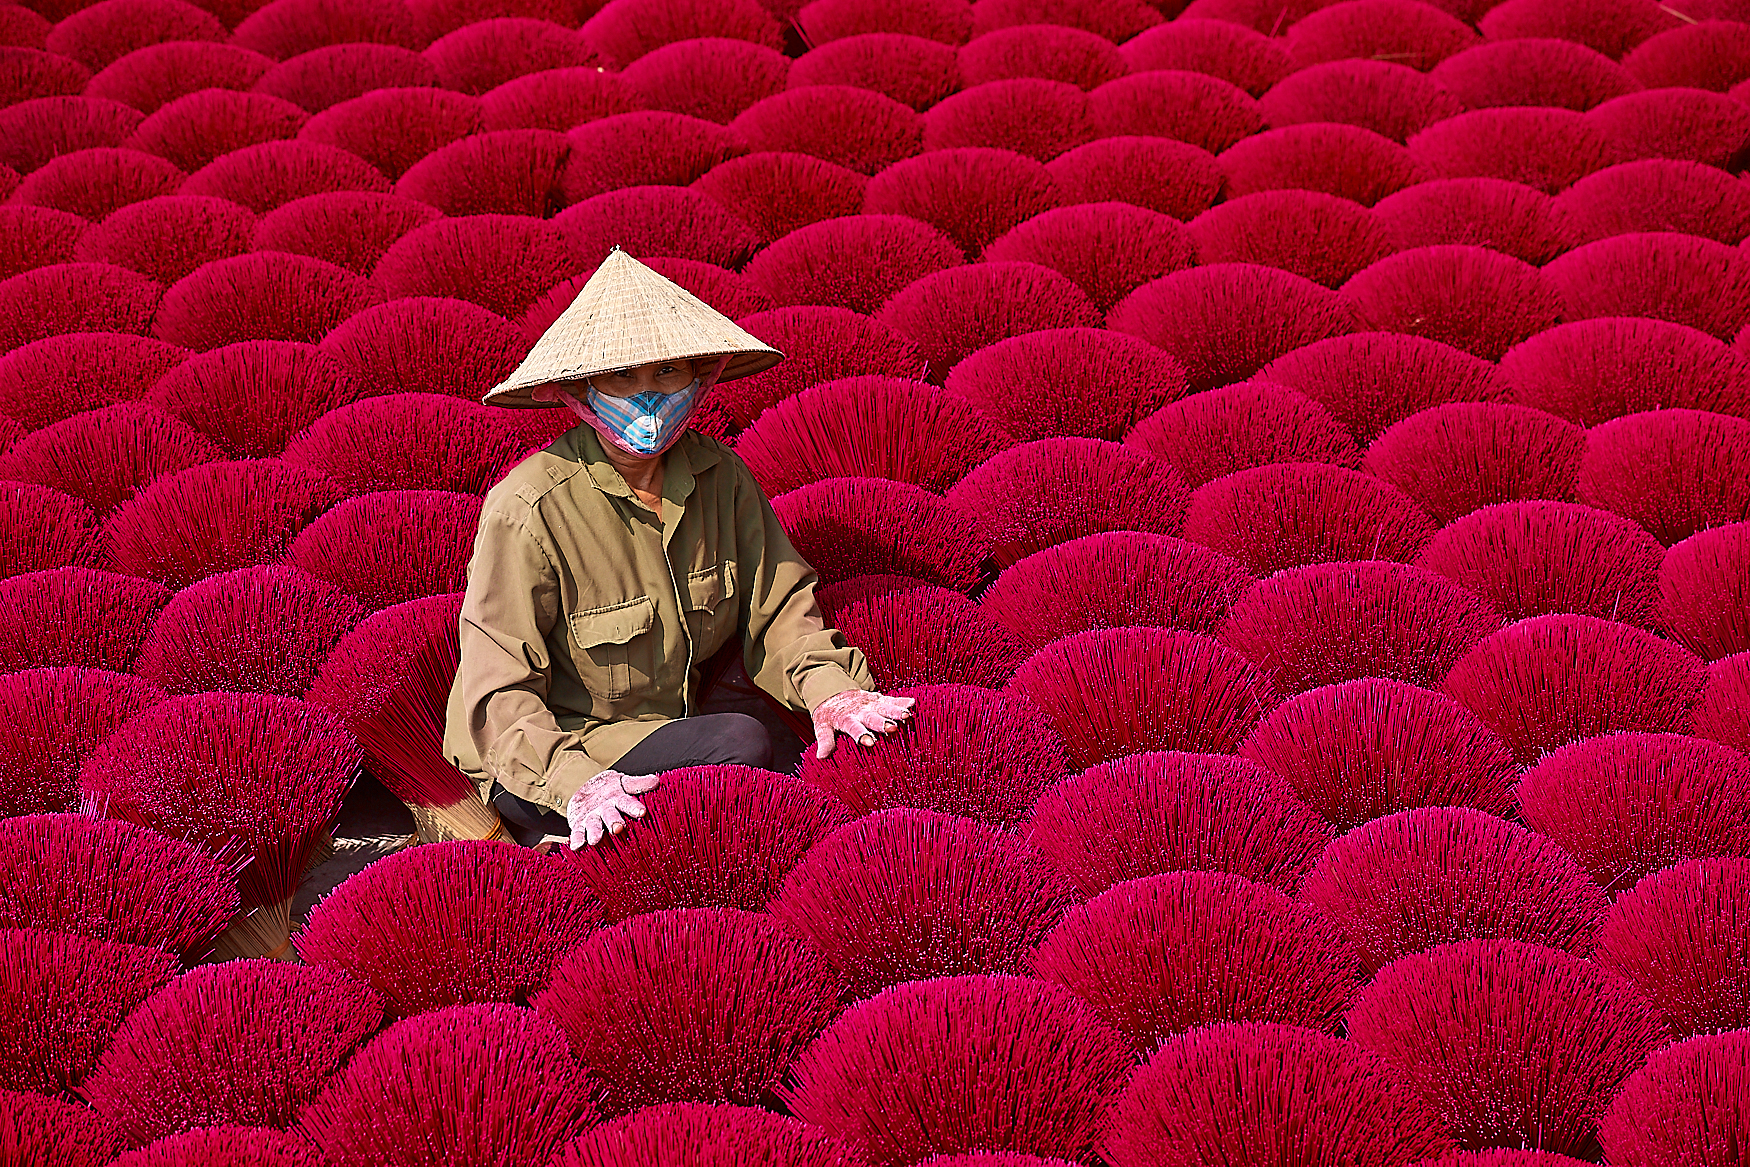 There are few sights more beautiful than a field of incense sticks